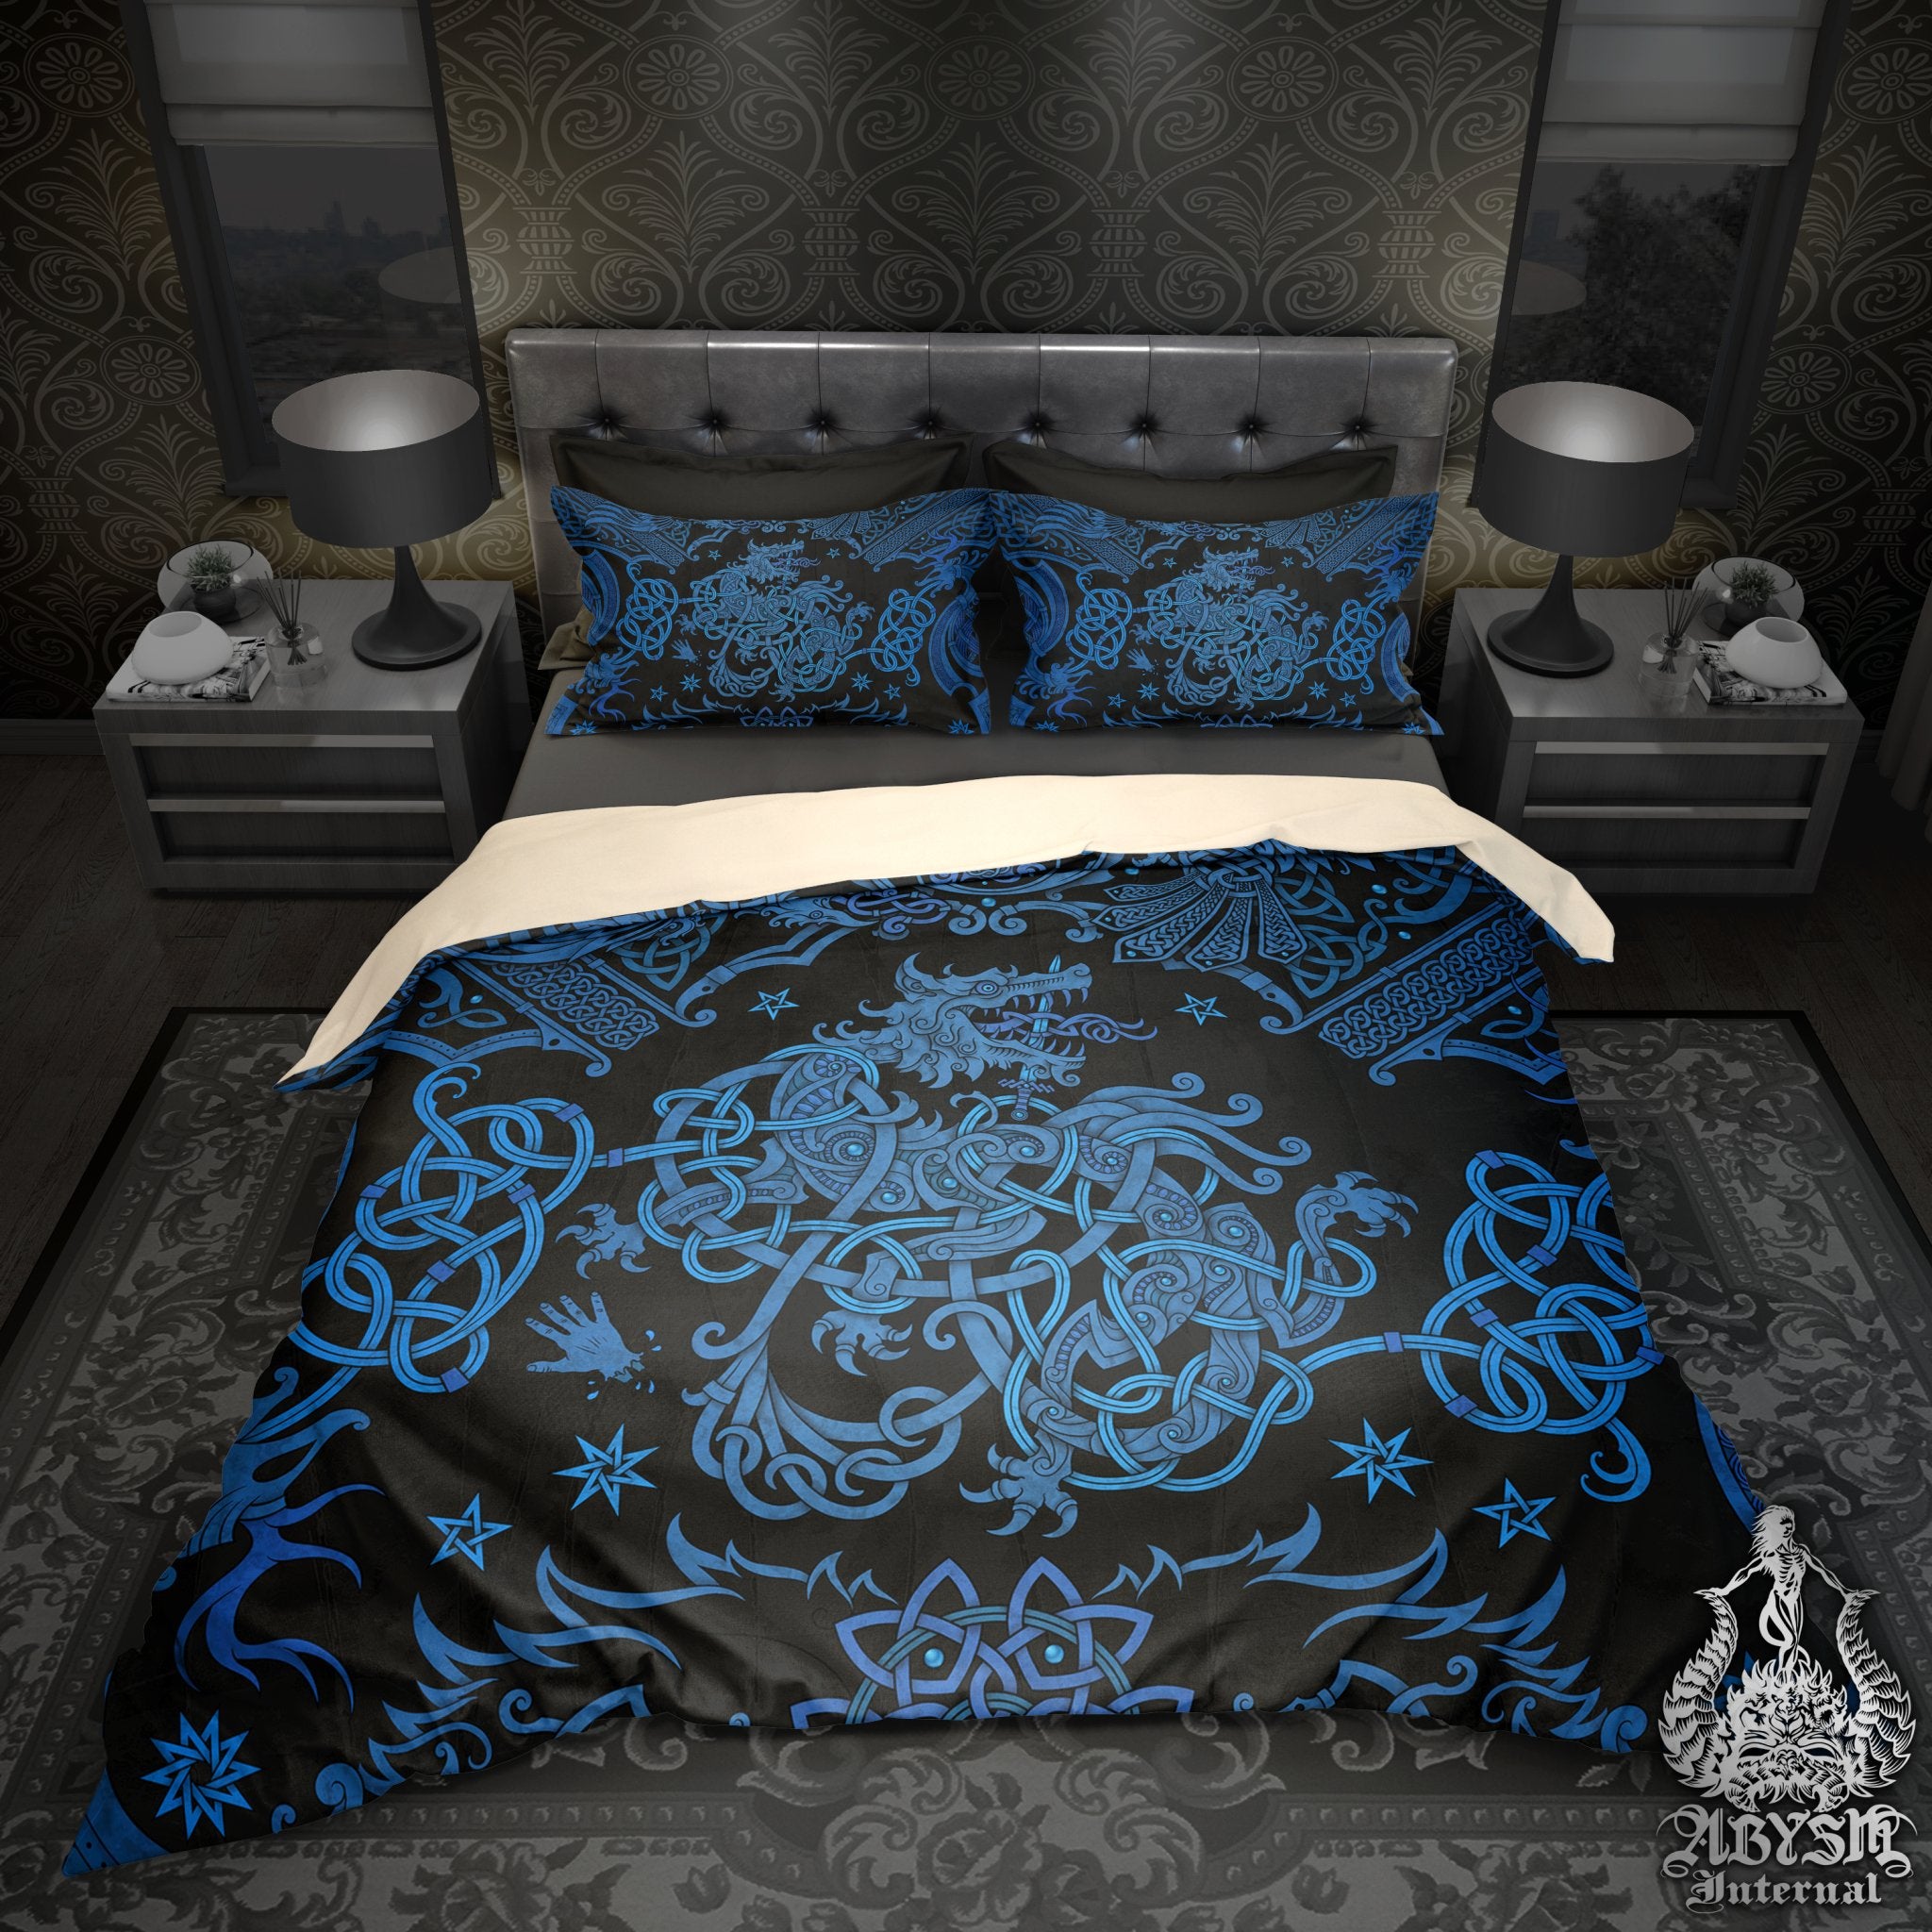 Fenrir Bedding Set, Comforter or Duvet, Viking Bed Cover and Bedroom Decor, Norse Wolf Art Print, King, Queen & Twin Size - Black and Blue - Abysm Internal